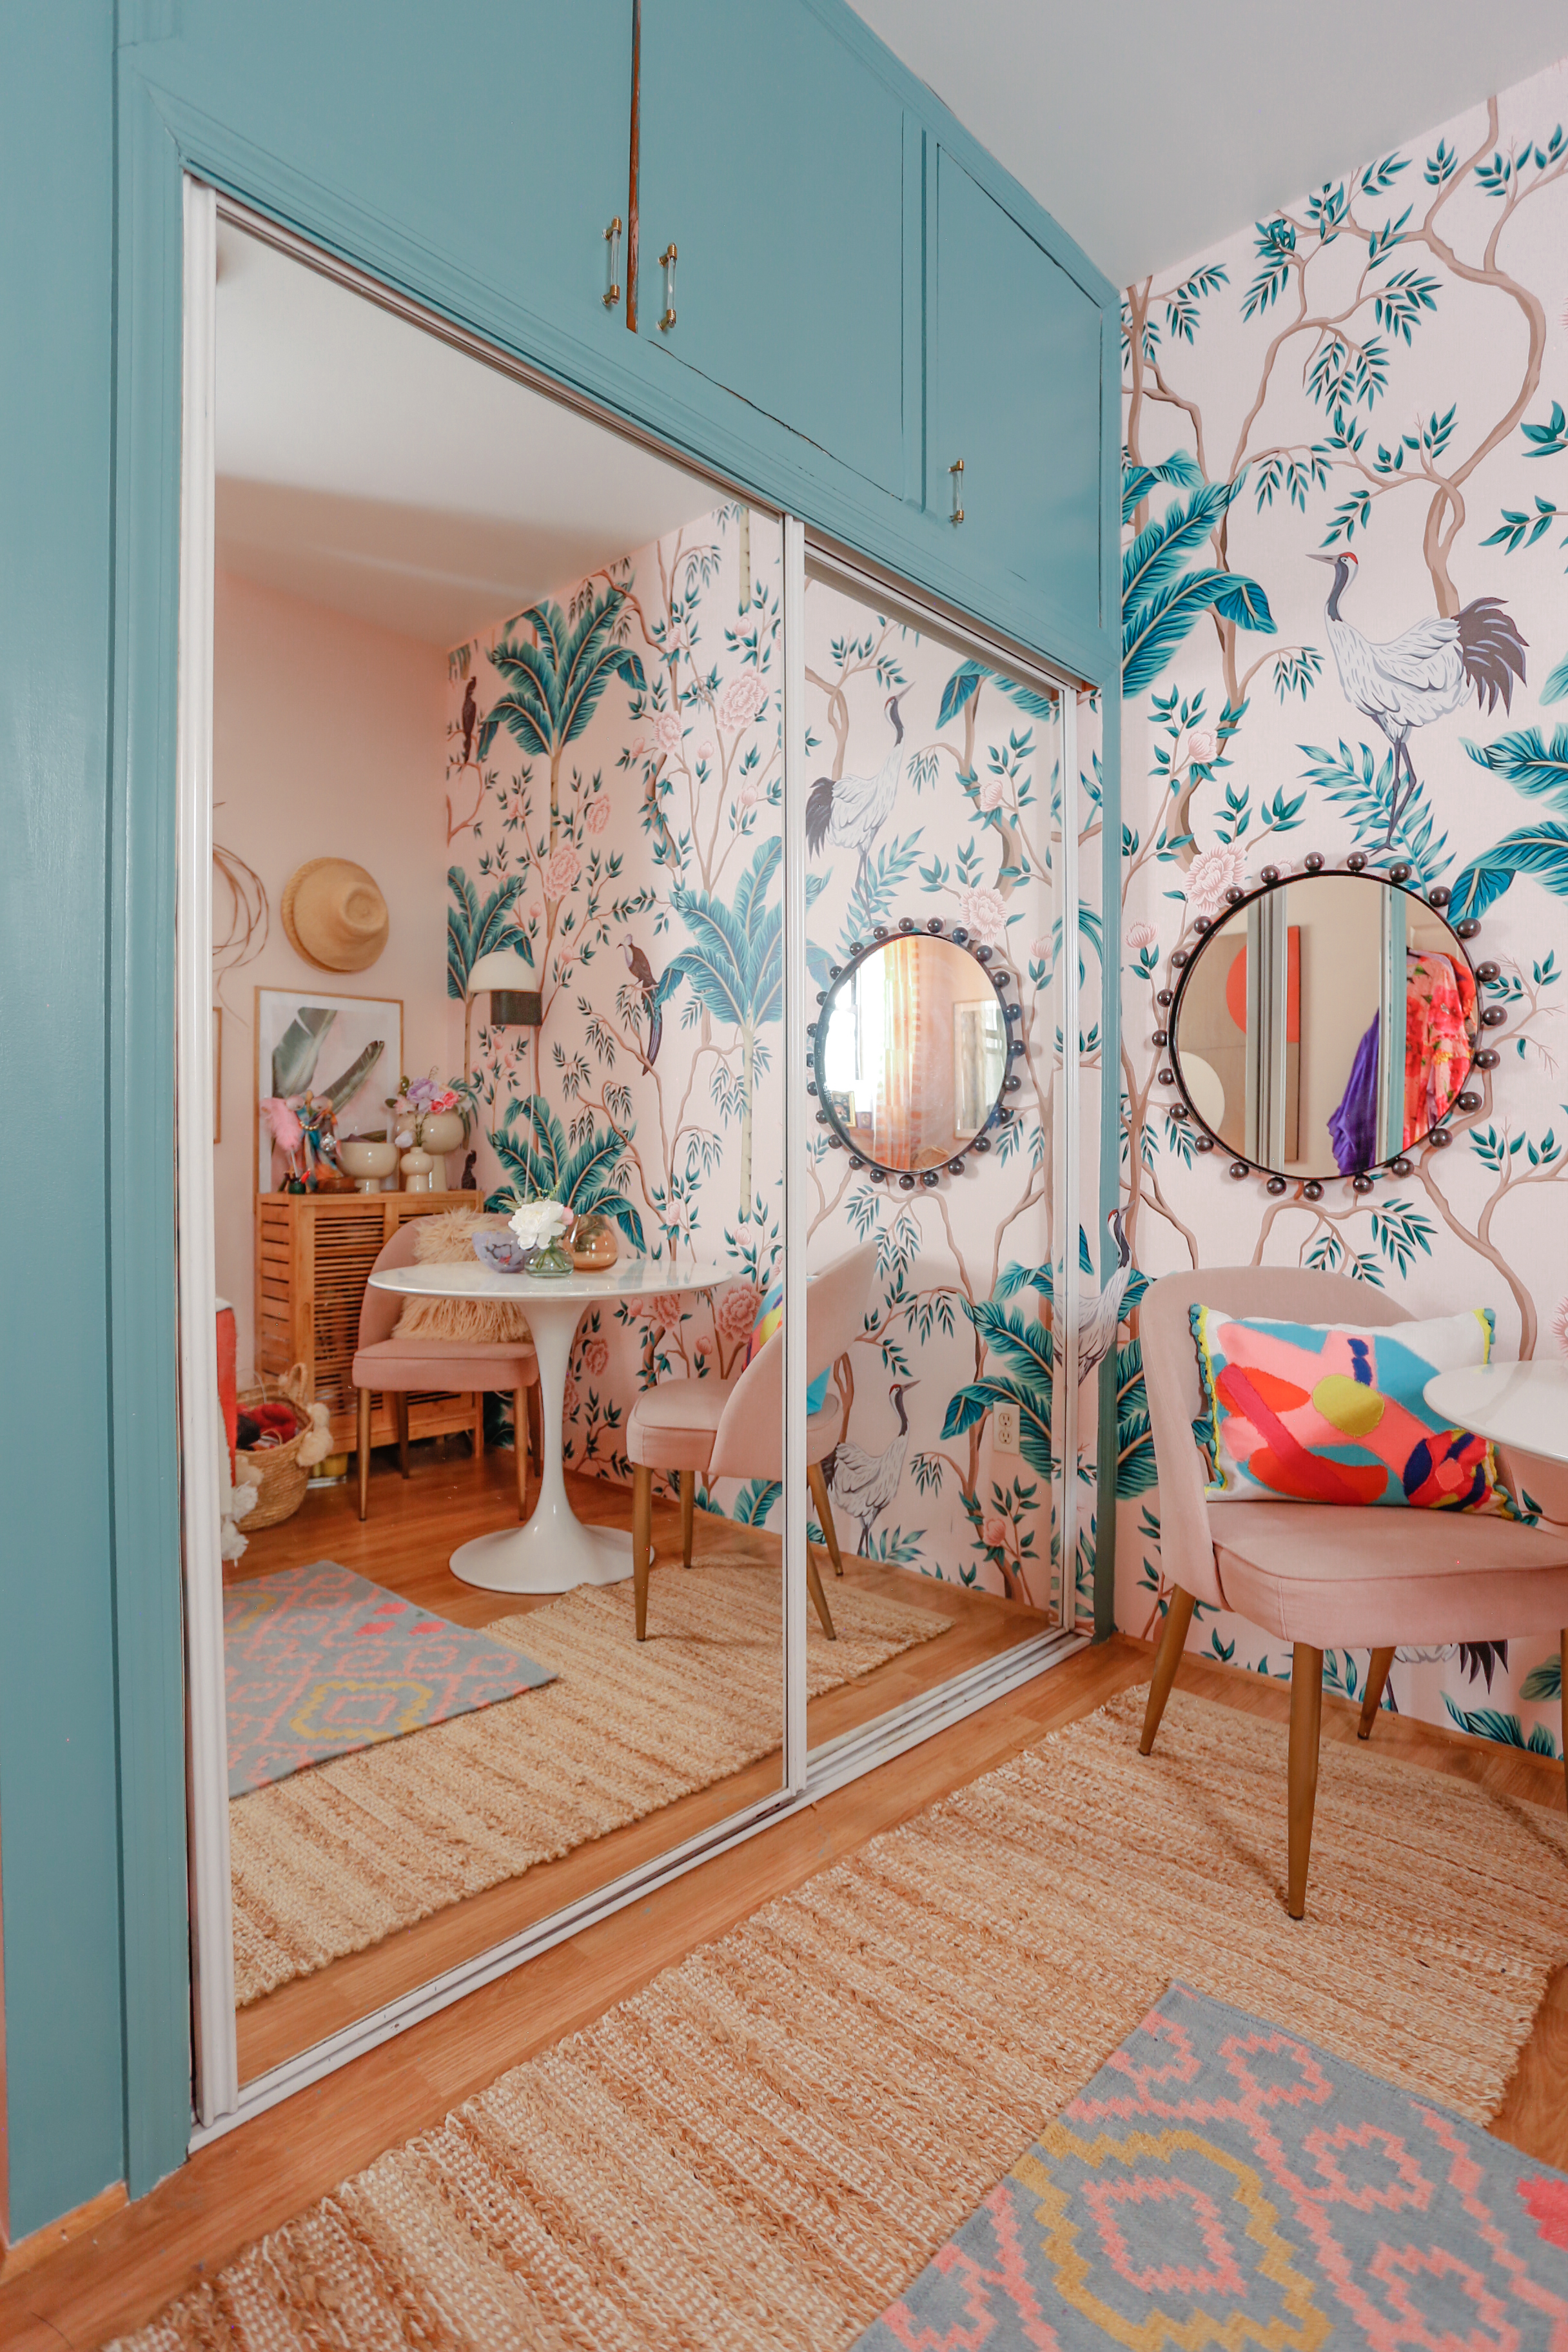 Clare Vacay // Pink and Green Office // Best Blue Green Paint // Pink and Green Chinoiserie Mural // Chinoiserie Wallpaper // Home Office Decor // Colorful Home Office // Pink and Green Home Office // Home Office Decor // Home Office Inspo // Home Office Colors // Megan Zietz Home Office // Maximalist Home Office // Green and Pink Office Ideas // Closet Makeover